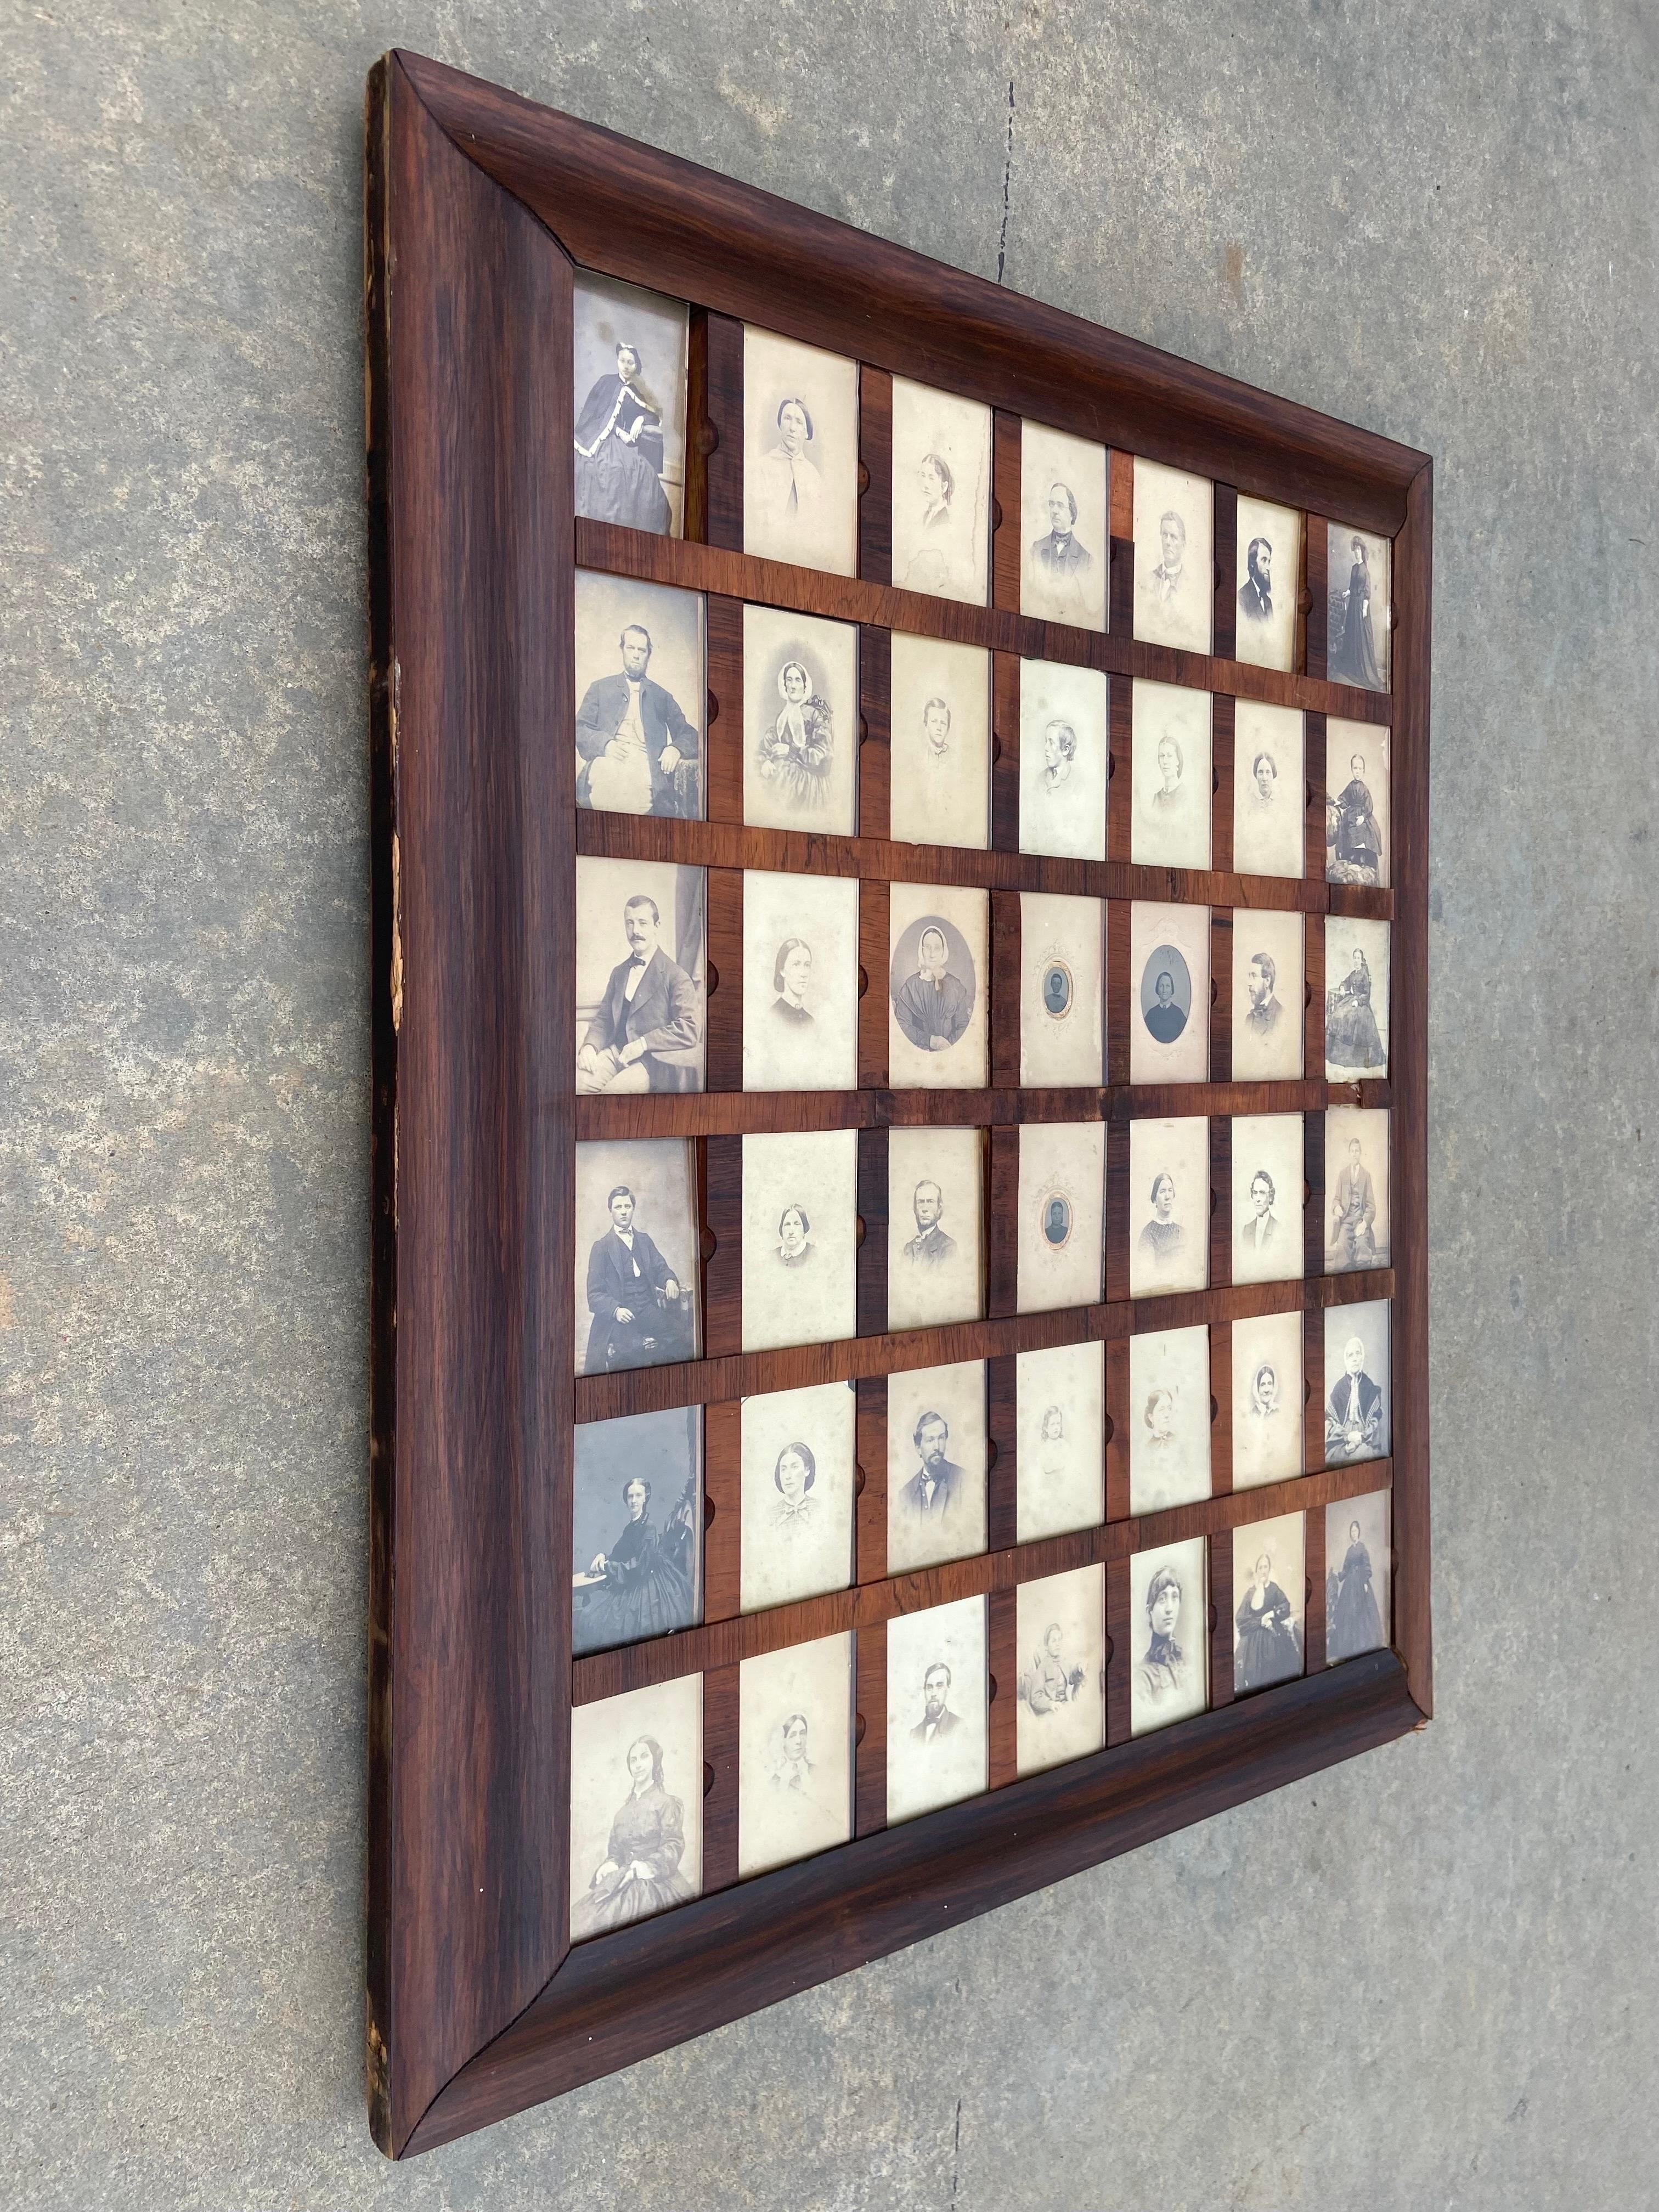 An antique, American Empire era hand made picture frame cabinet containing a collection of forty two black and white photographic images, which could very well be all images of an extended family. Each photograph measures approximately 2.25